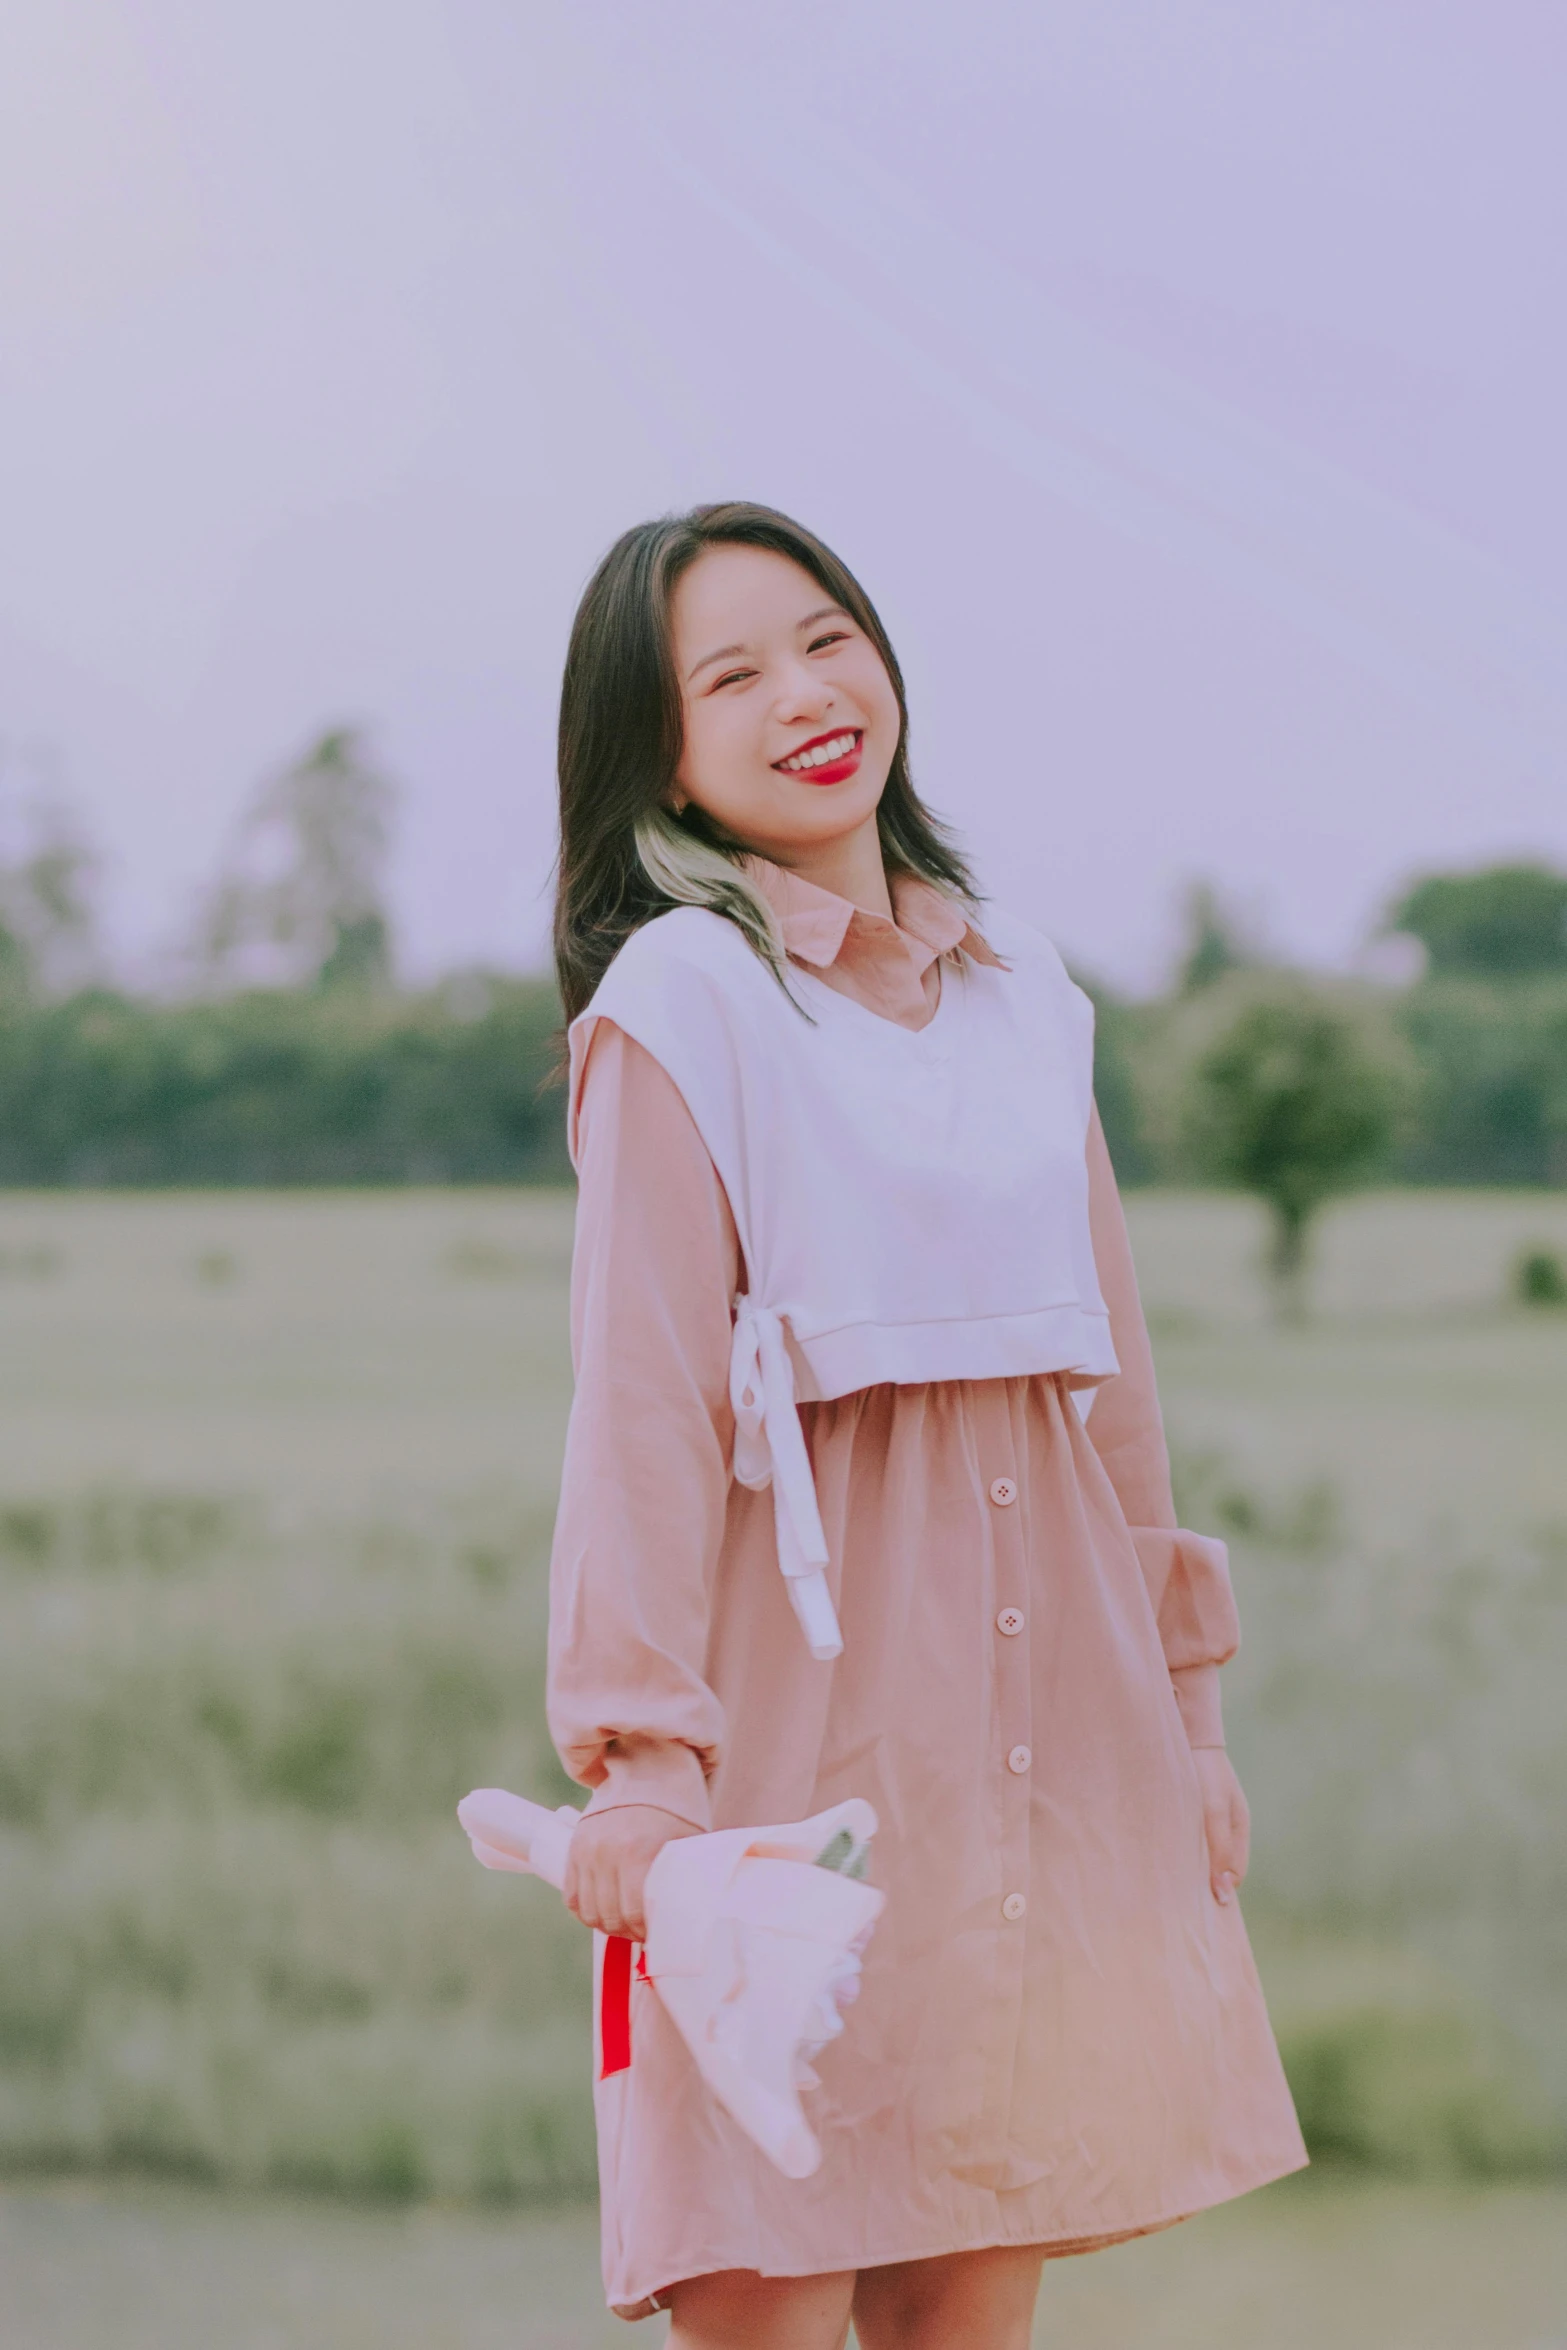 an asian woman with short black hair and a pink dress smiles in a field